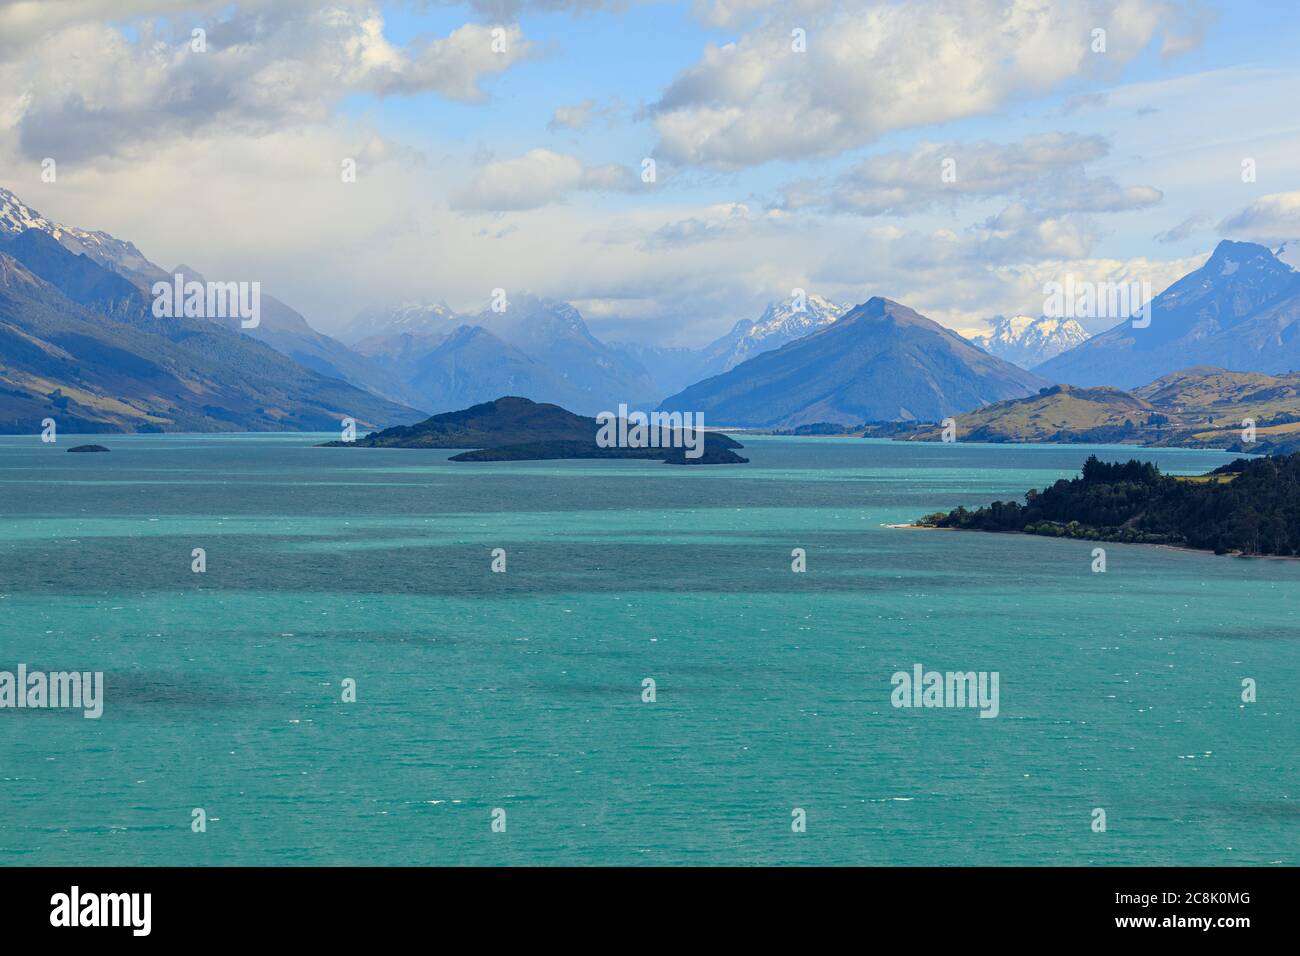 The view of Lake Wakatipu with clouds covering the snow-capped mountains in the distance. From the view of Bennetts Bluff Lookout. Stock Photo